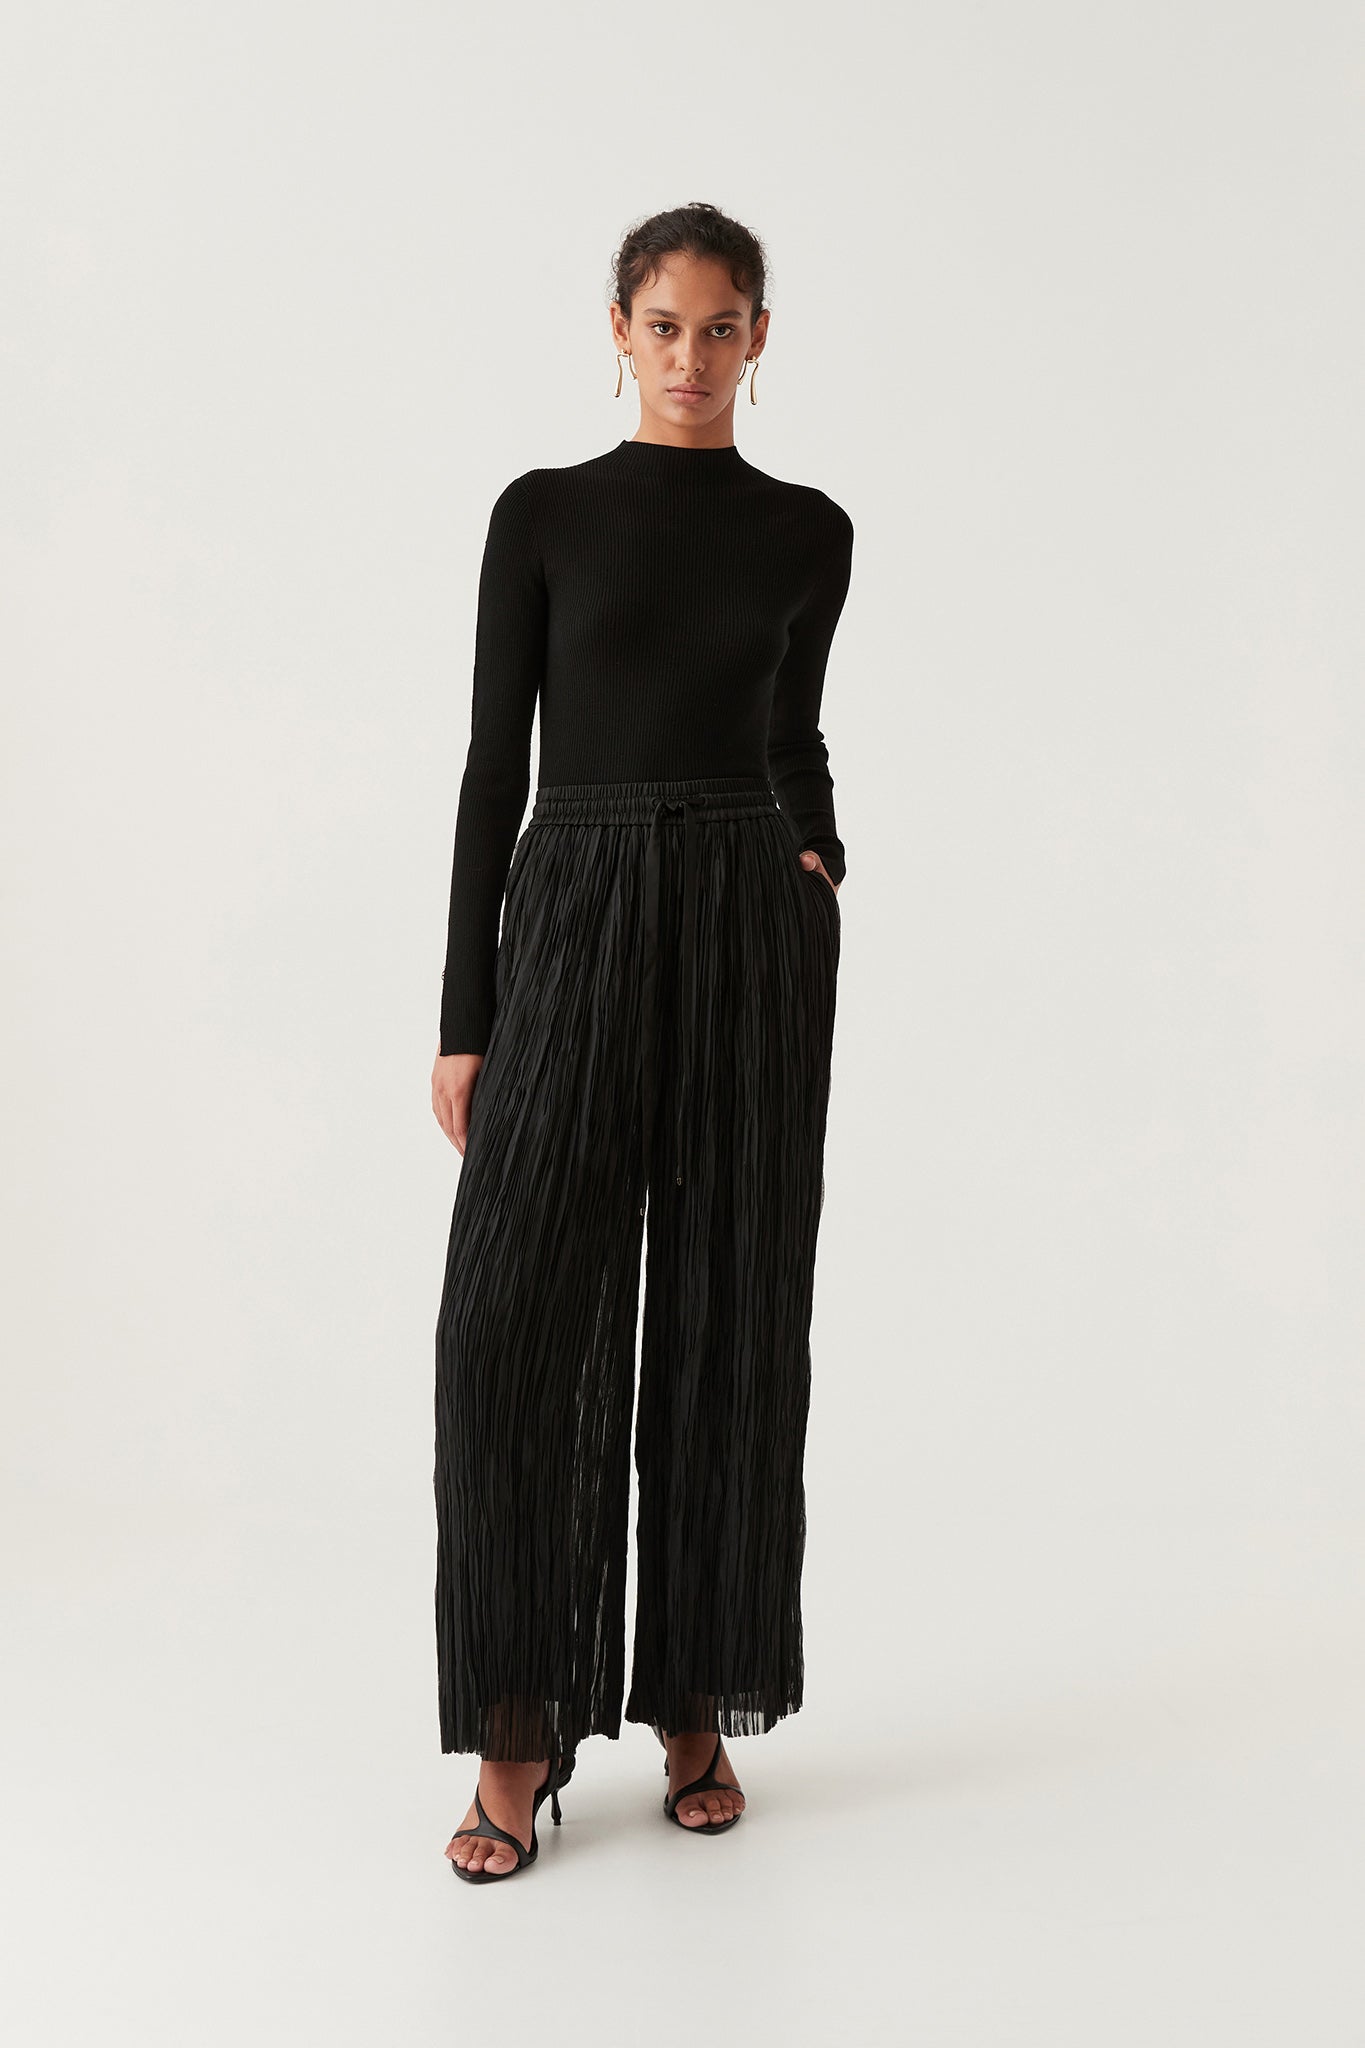 pleated/gathered Palazzo trouser with elastic waist band.